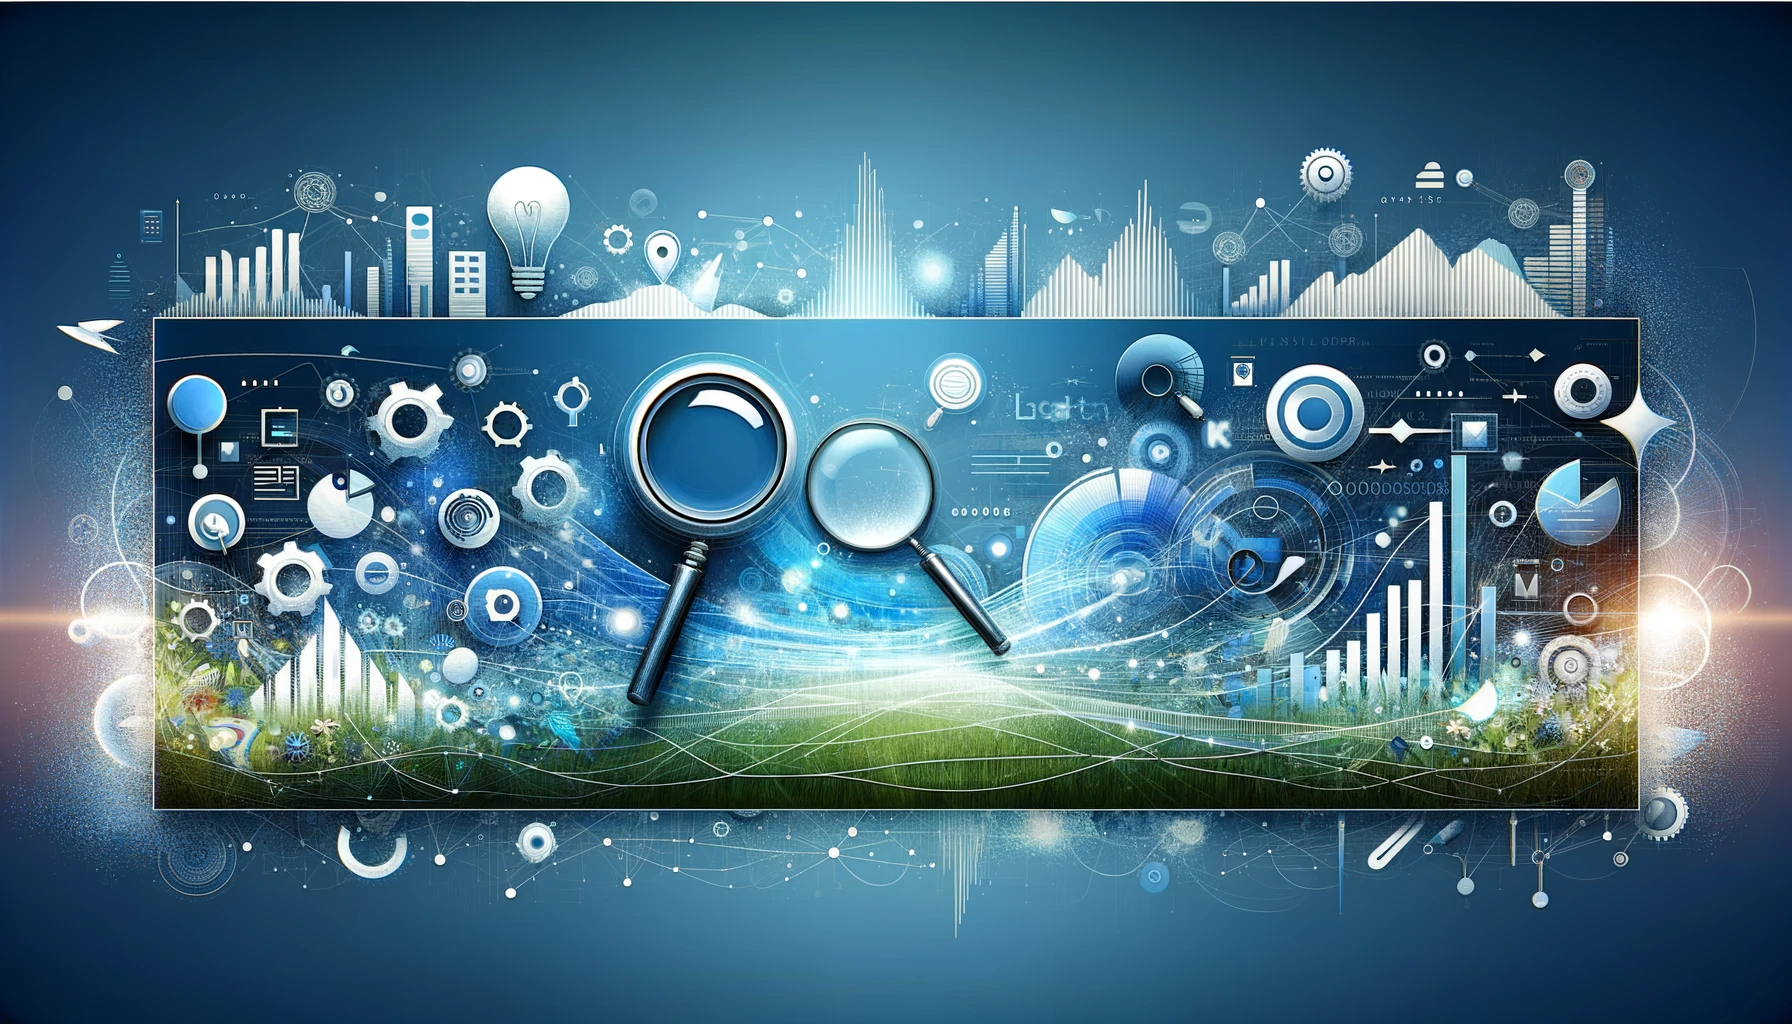 Abstract digital landscape representing SEO services with icons like magnifying glasses, charts, and graphs in blues and greens, symbolizing data analysis and internet connectivity.